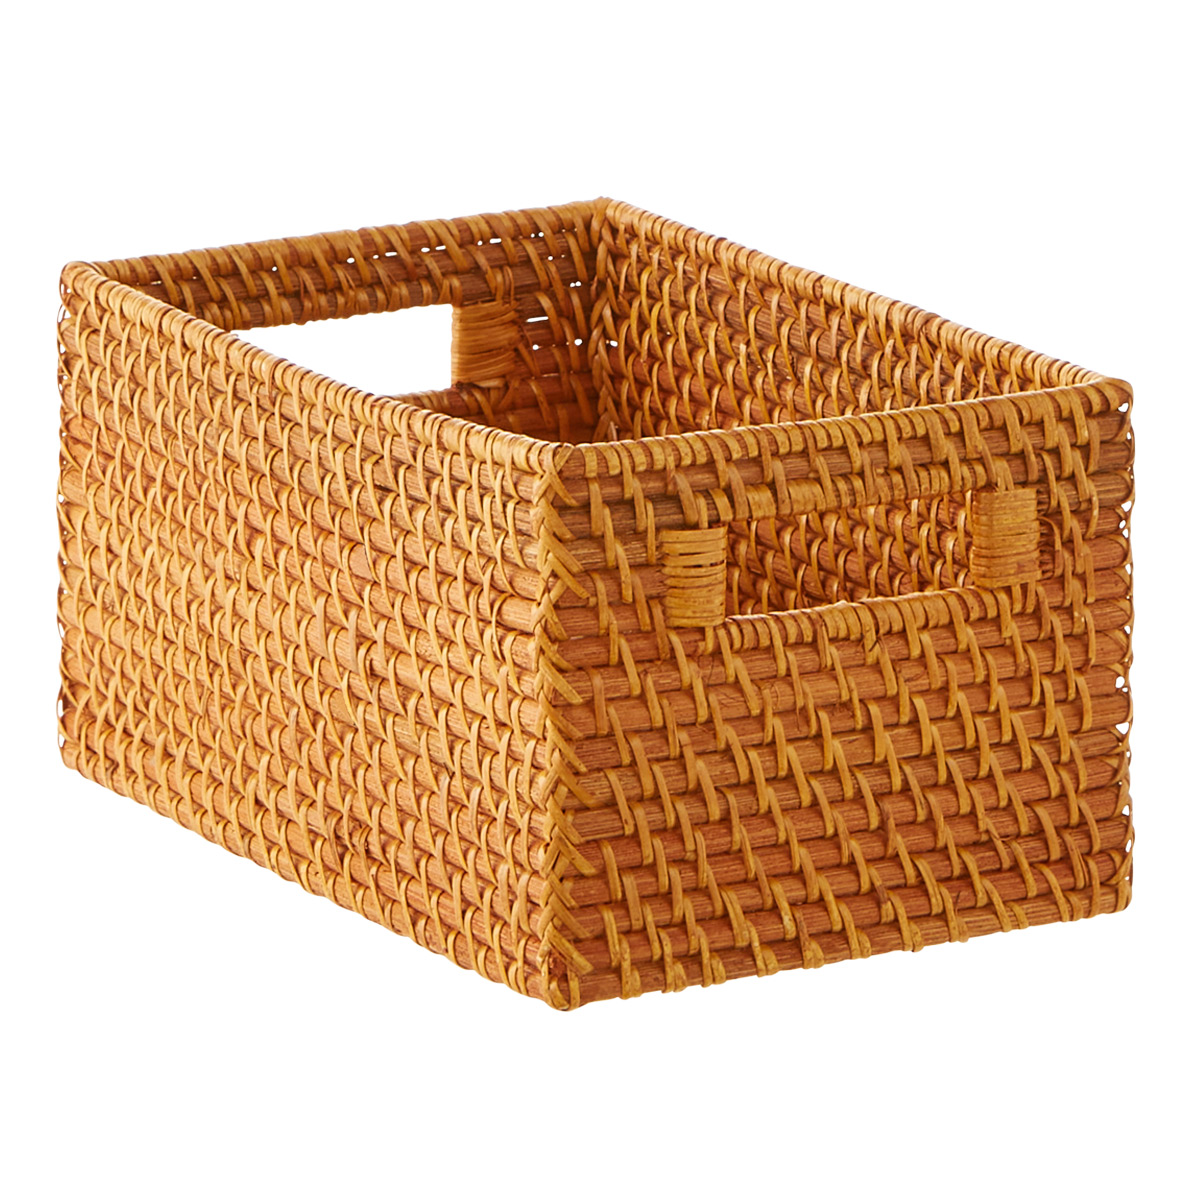 Rattan Fruit Basket Woven Wicker Storage Baskets Container Organizer for  Home